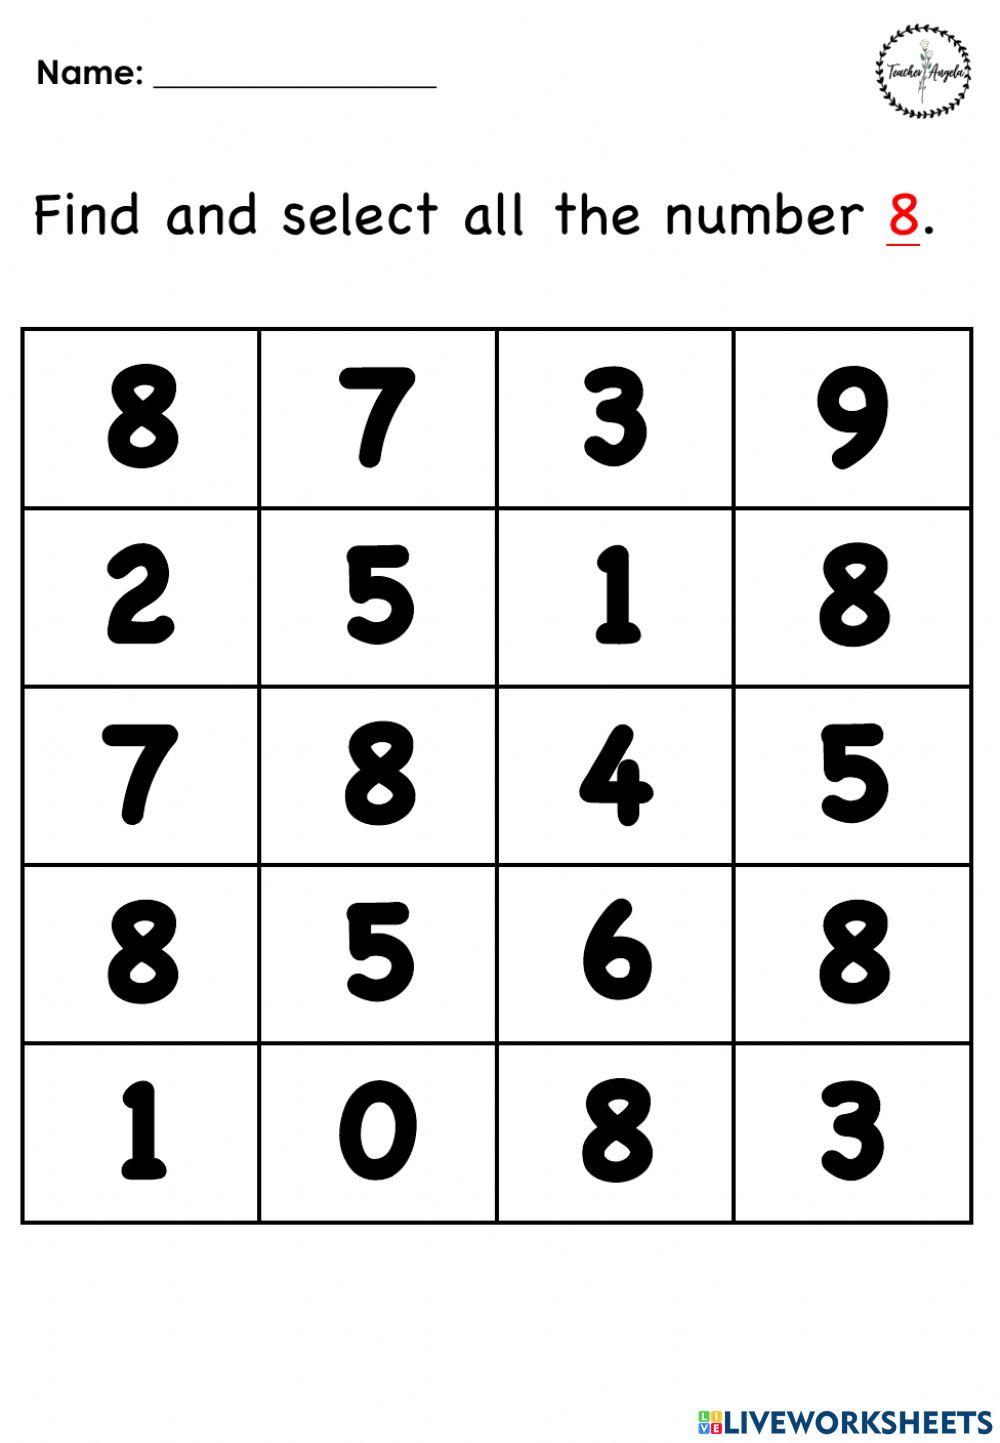 Find the number 8